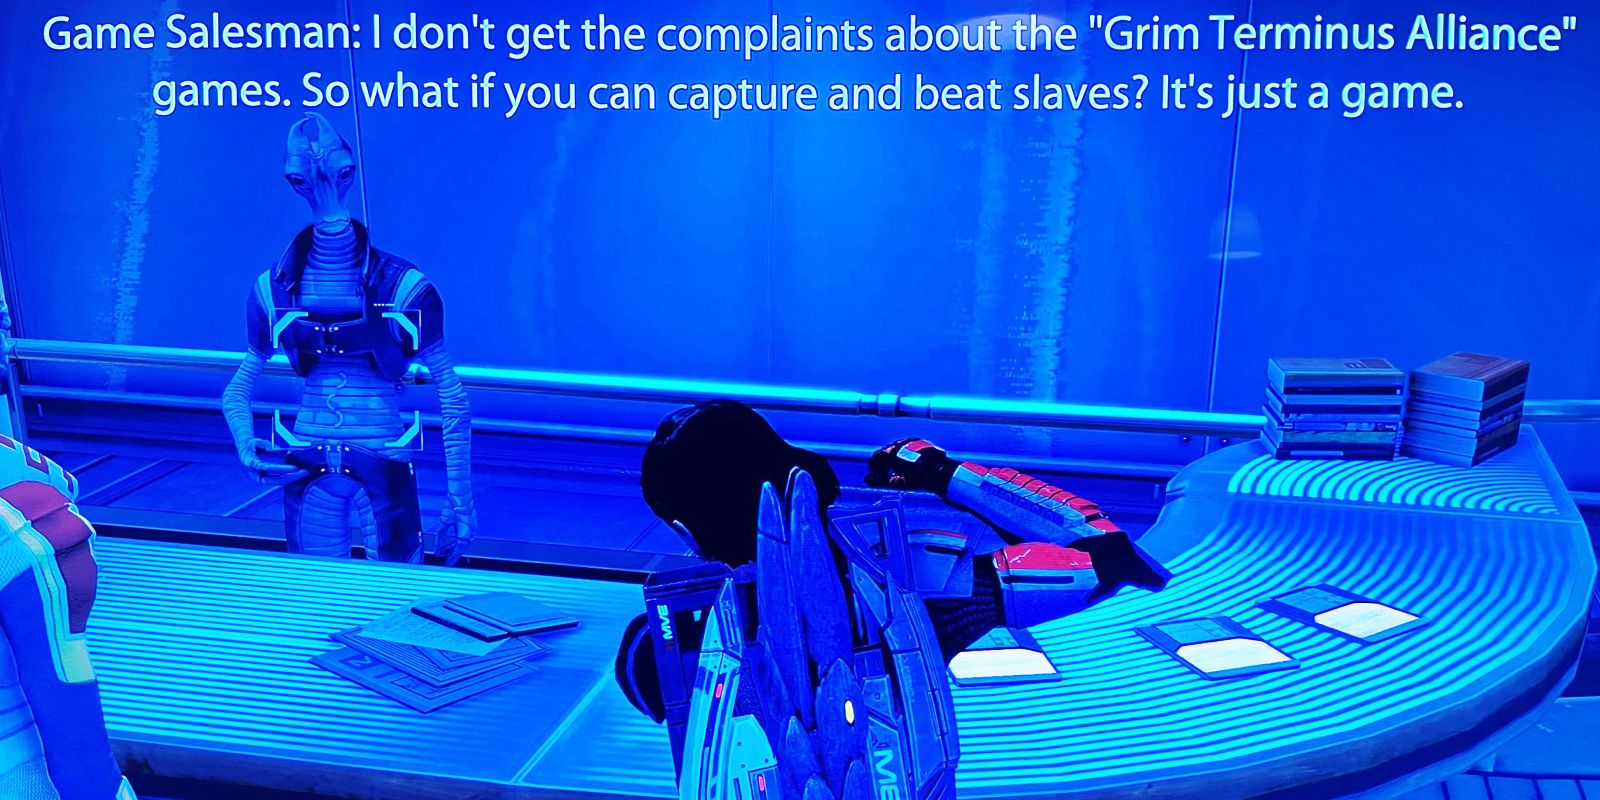 Mass Effect's GTA Joke Is Darker Than Rockstar's Game ME2 Grand Theft Auto Reference Easter Egg